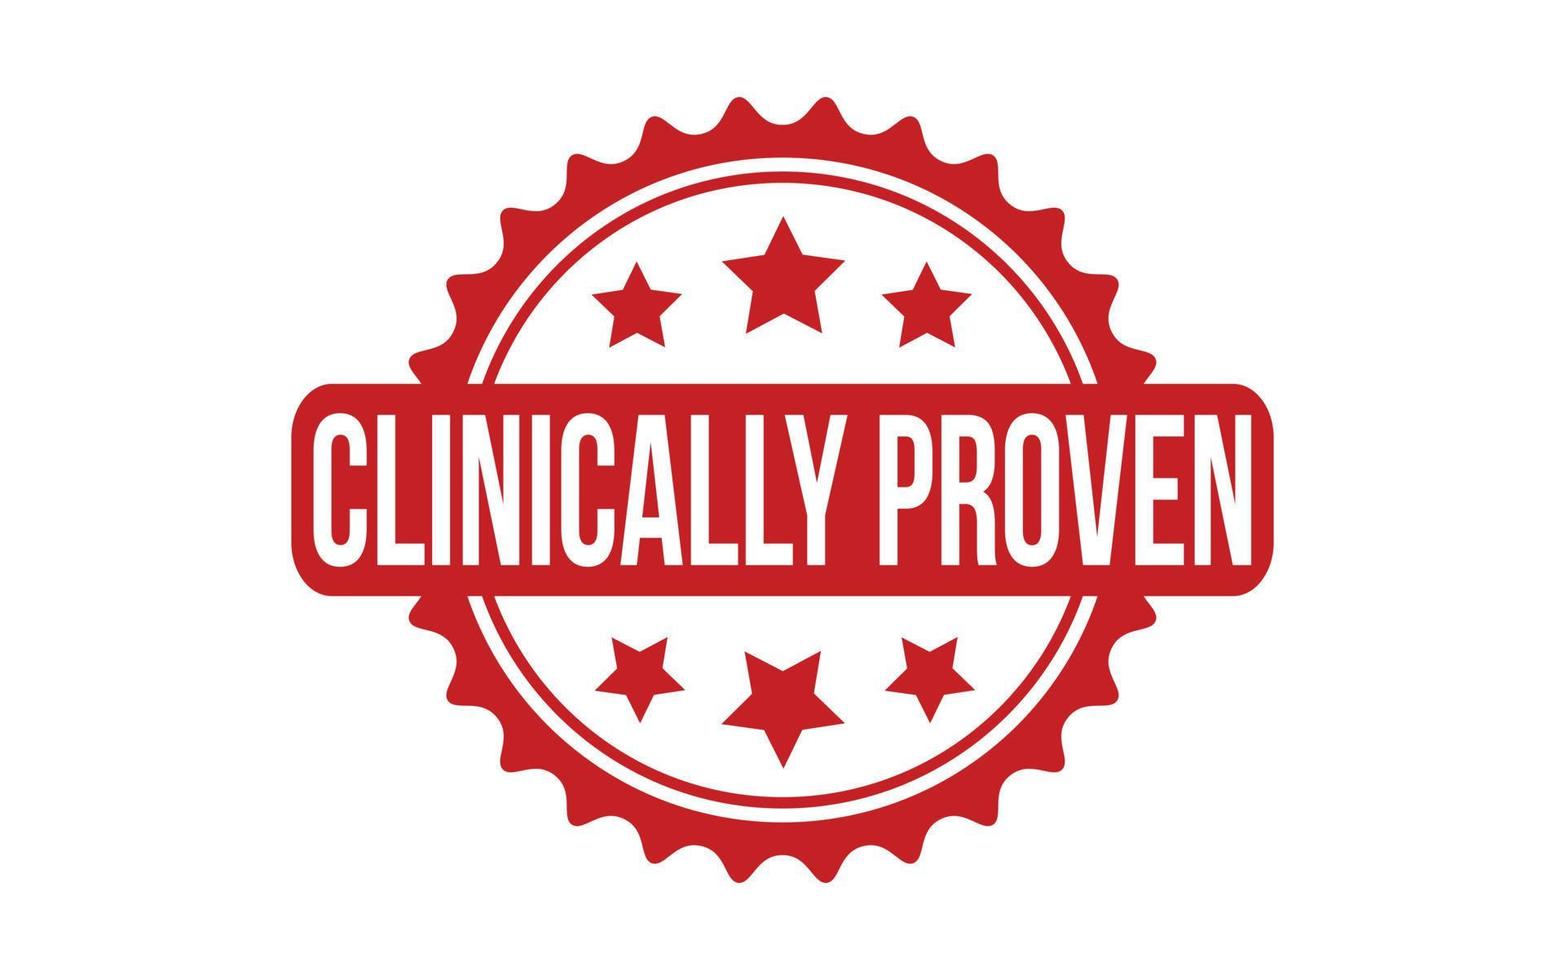 Clinically Proven Rubber Stamp Seal Vector